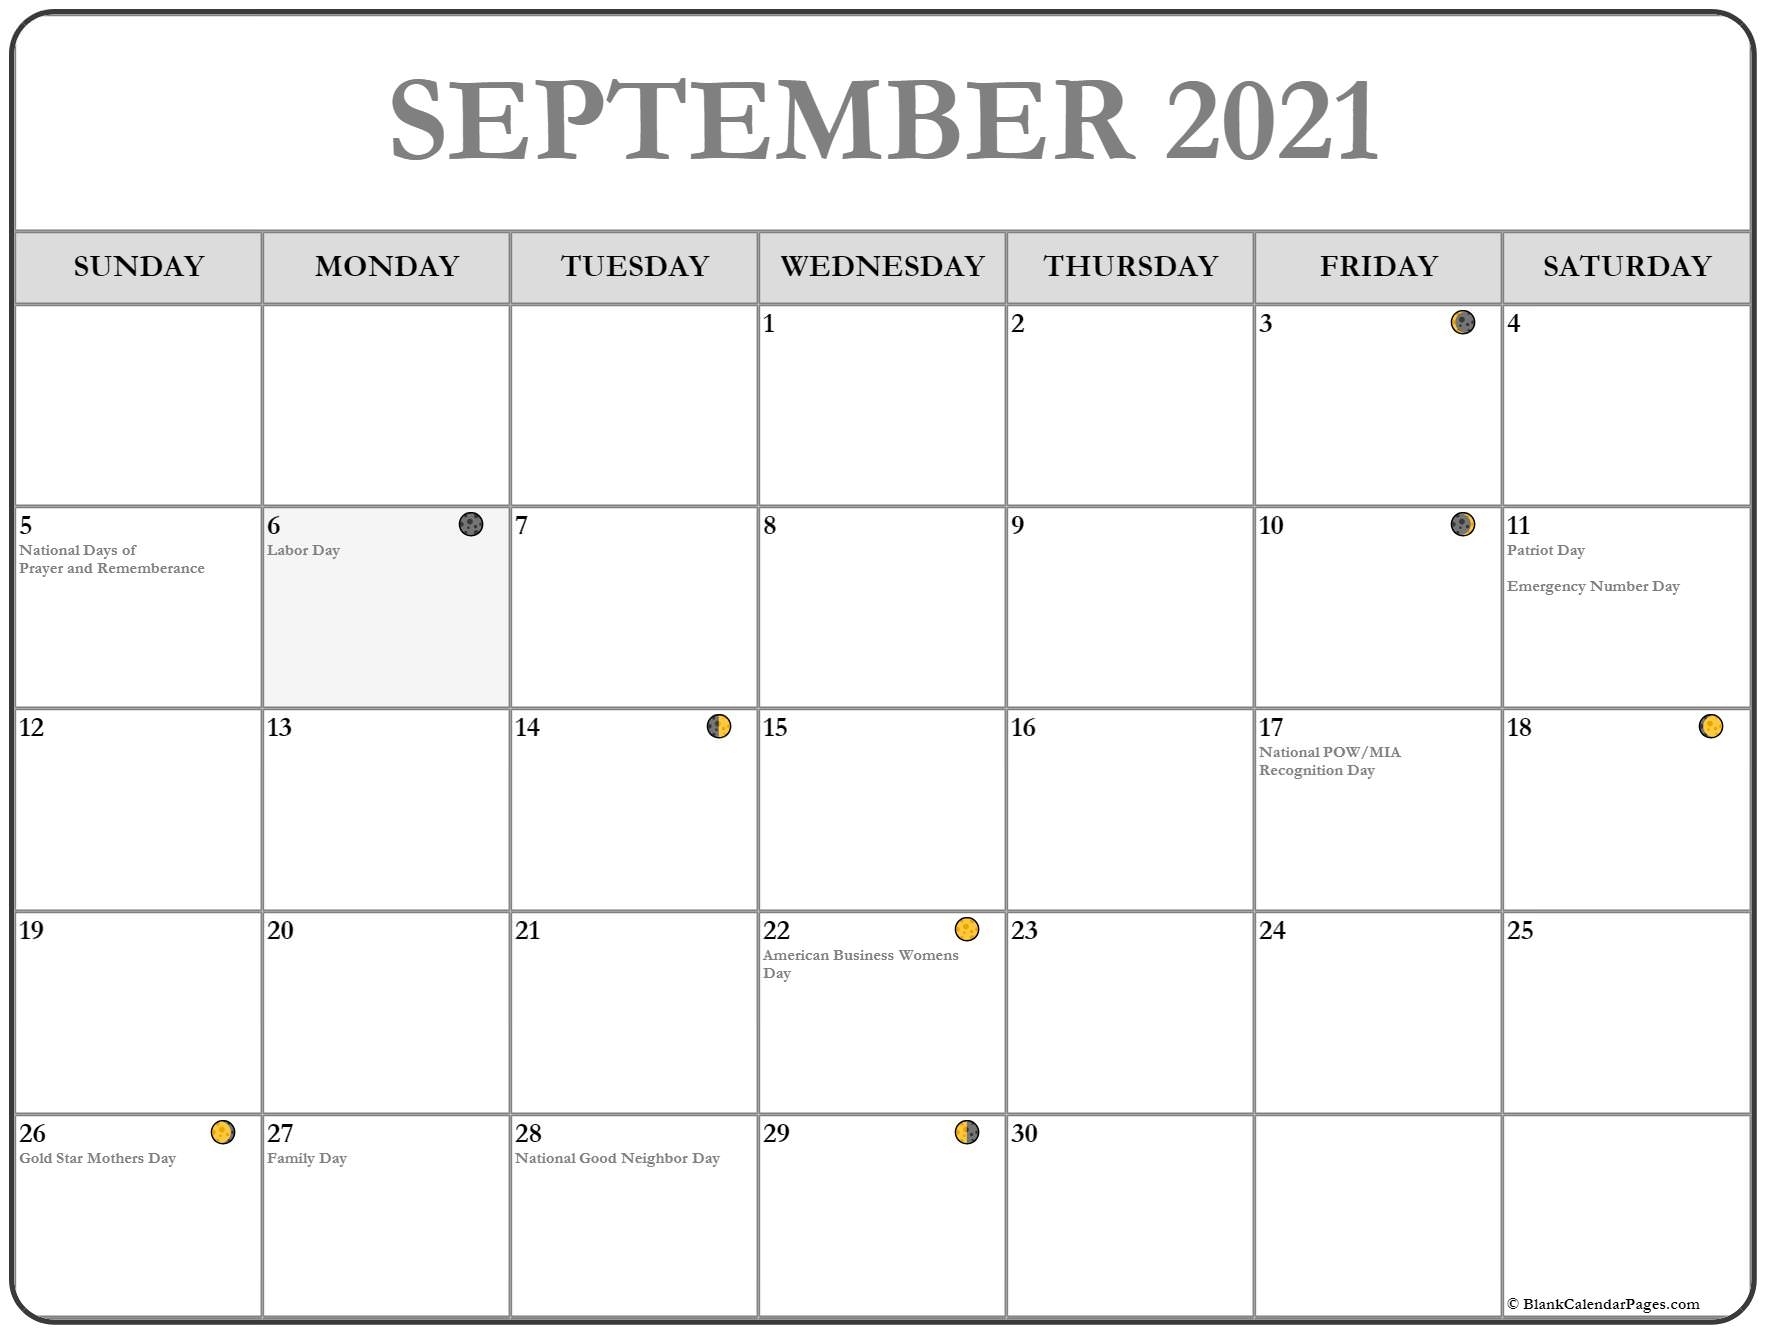 Catch Moon Phases September 2021